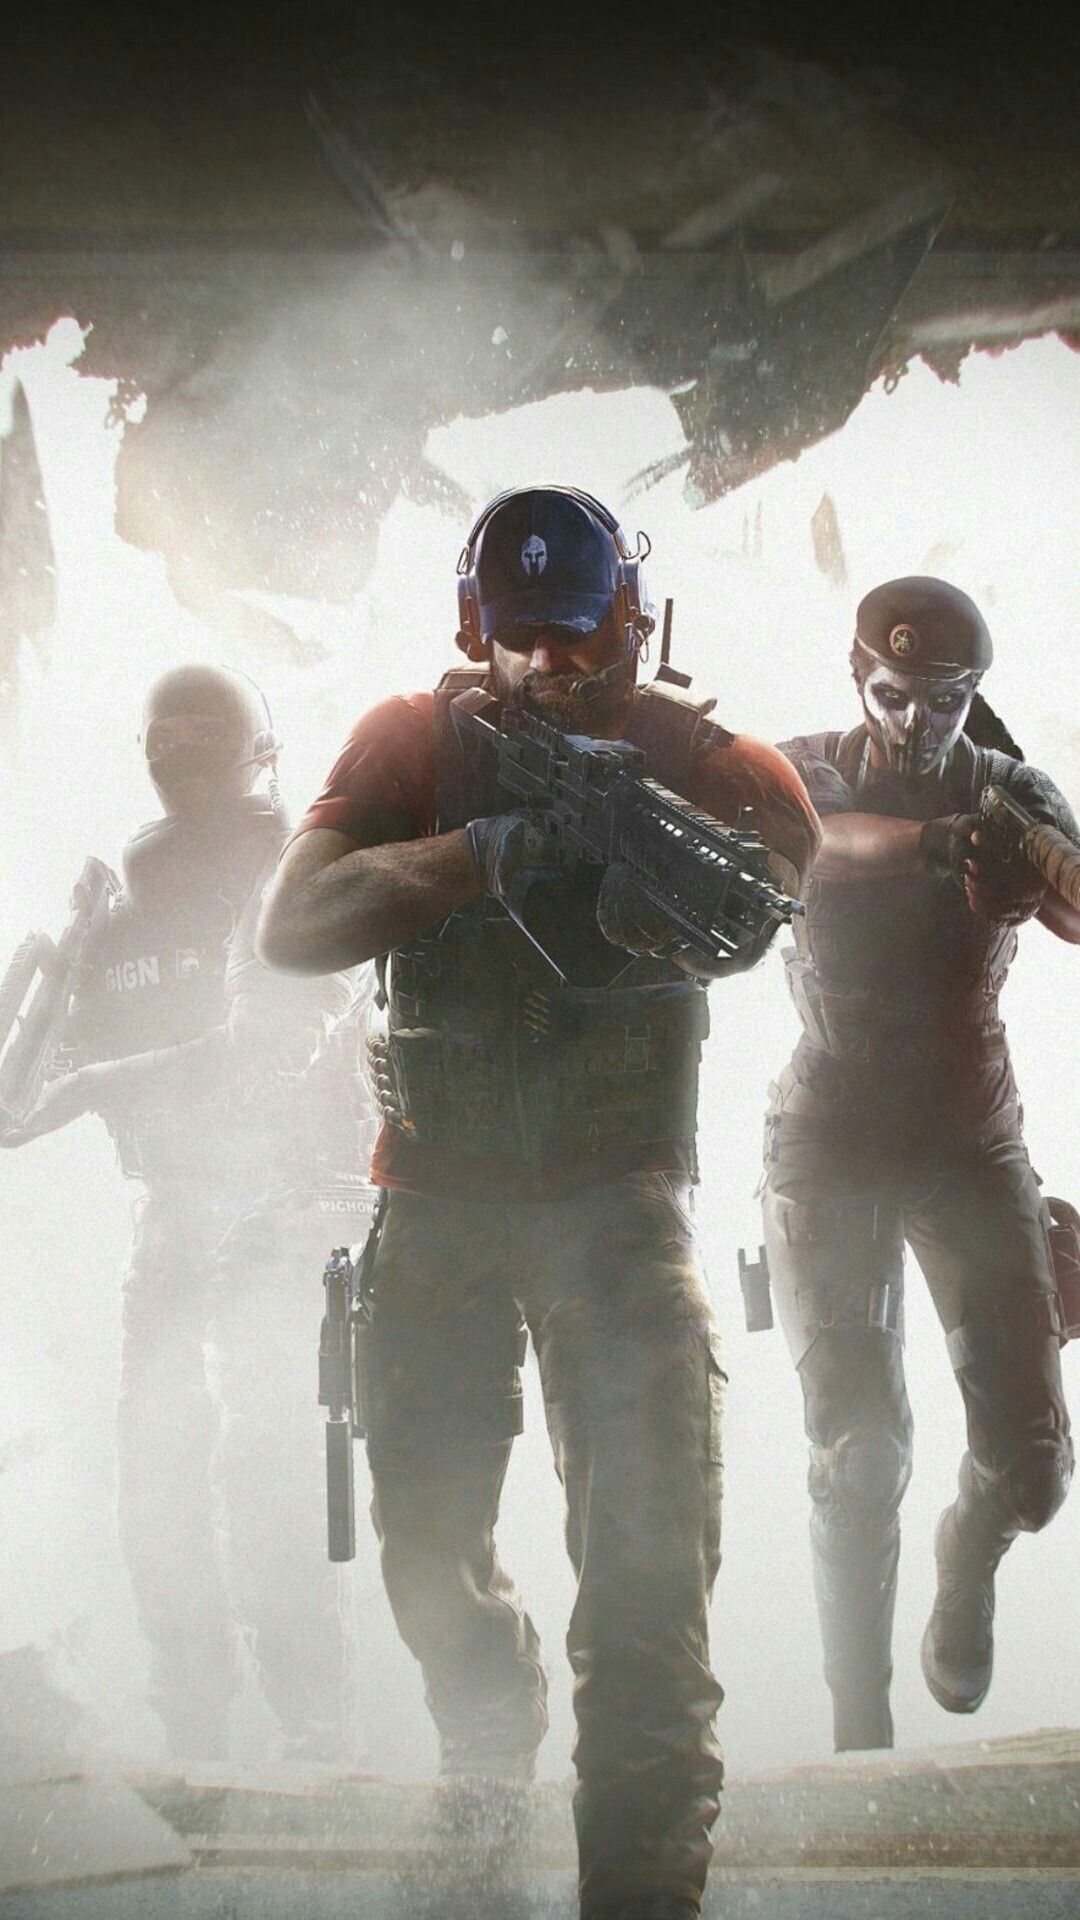 Ghost Recon: Wildlands: Operation Archangel, The summer 2018 DLC that features characters from Tom Clancy's Rainbow 6: Siege. 1080x1920 Full HD Background.